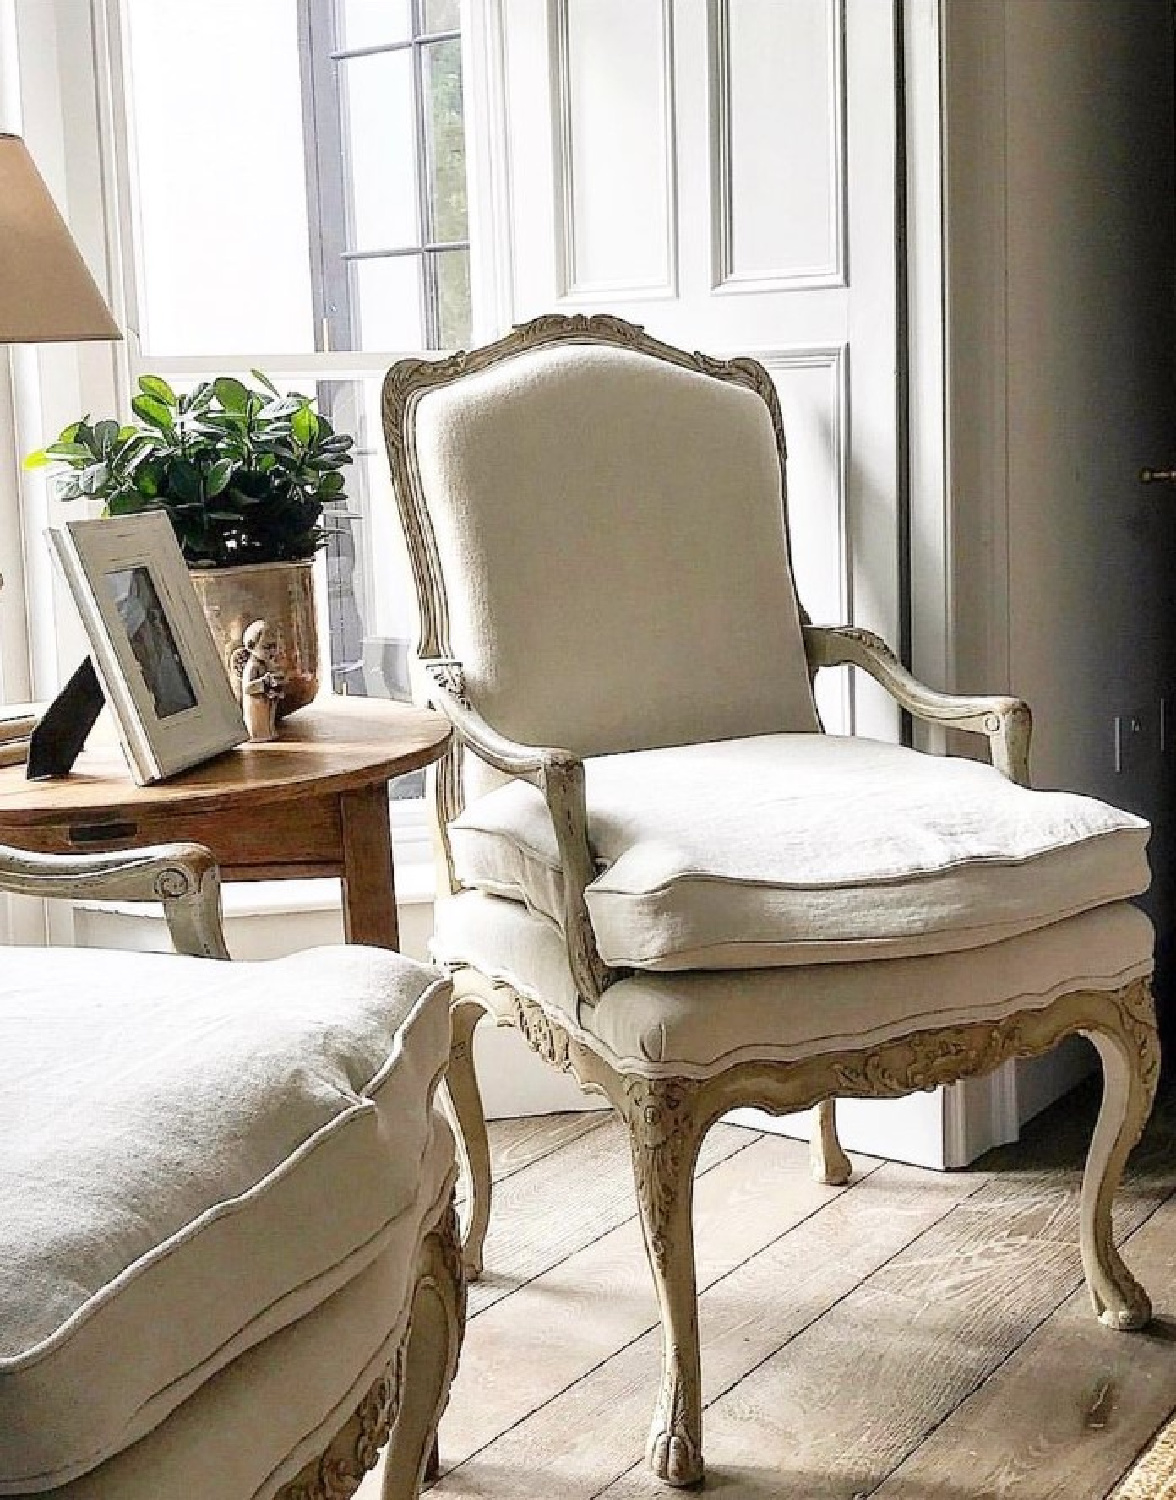 @minniepetersdesign - Belgian linen on elegant chairs in a paneled European country space. #belgianlinen